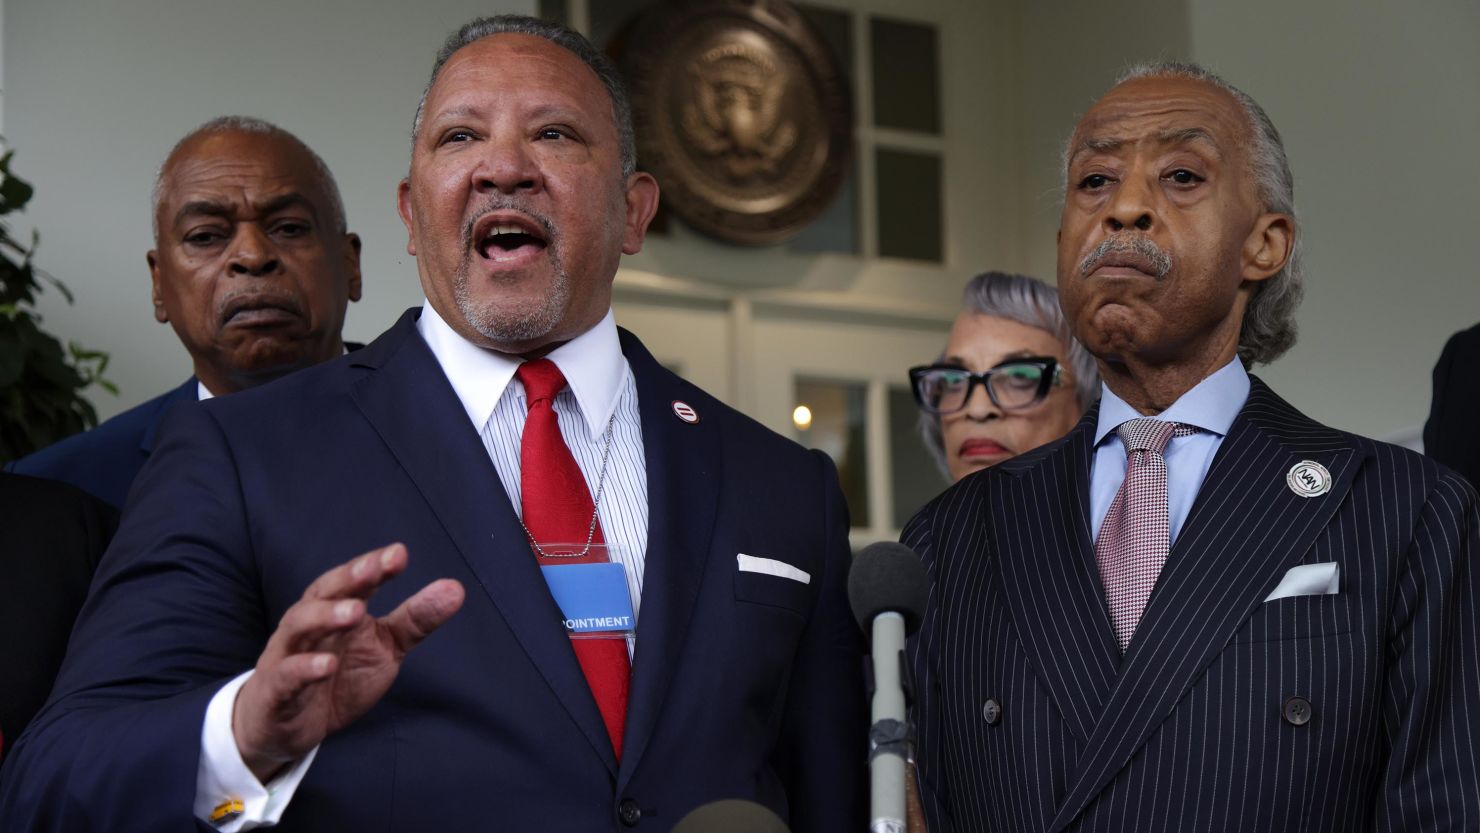 Civil rights leader Marc Morial of the National Urban League speaks as (L-R) Wade Henderson of the Leadership Conference for Civil & Human Rights, Johnnetta B. Cole of the National Council of Negro Women and the Rev. Al Sharpton of the National Action Network listen at a briefing outside the West Wing of the White House following a meeting with President Joe Biden and Vice President Kamala Harris July 8, 2021 in Washington, DC. The group met to discuss voting rights legislation and the George Floyd Justice in Policing Act.  